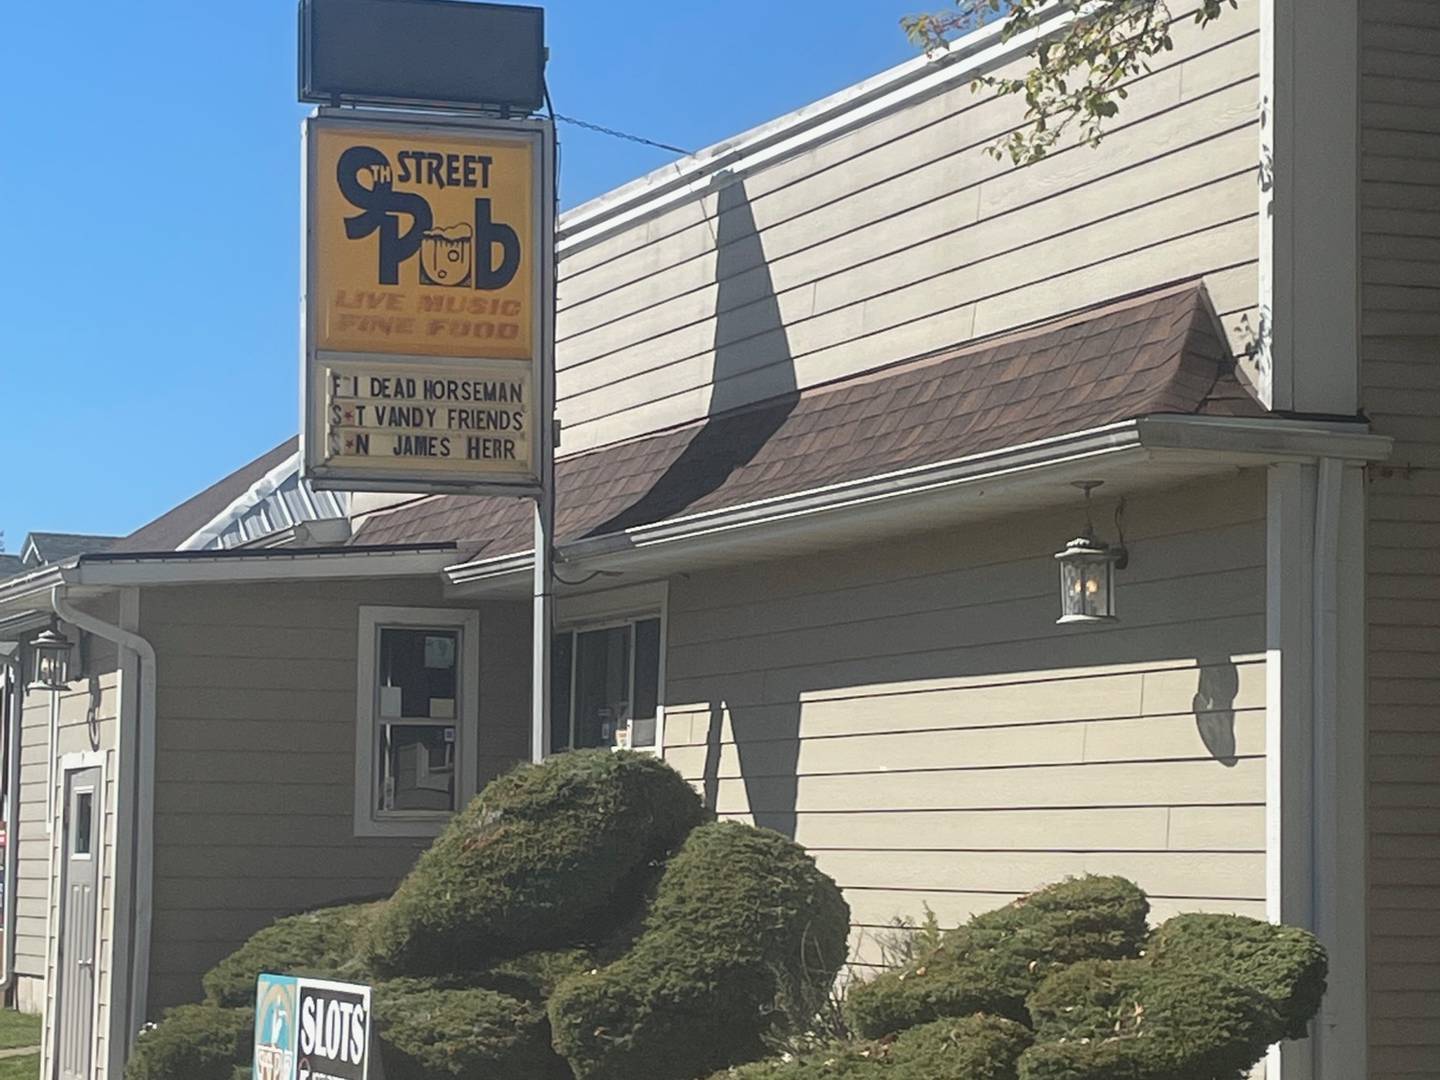 How does a La Salle tavern stay open for 45 years under continuous ownership? A good kitchen sure helps. The 9th Street Pub is open for weekend brunch and has a more diverse menu than many competitors.